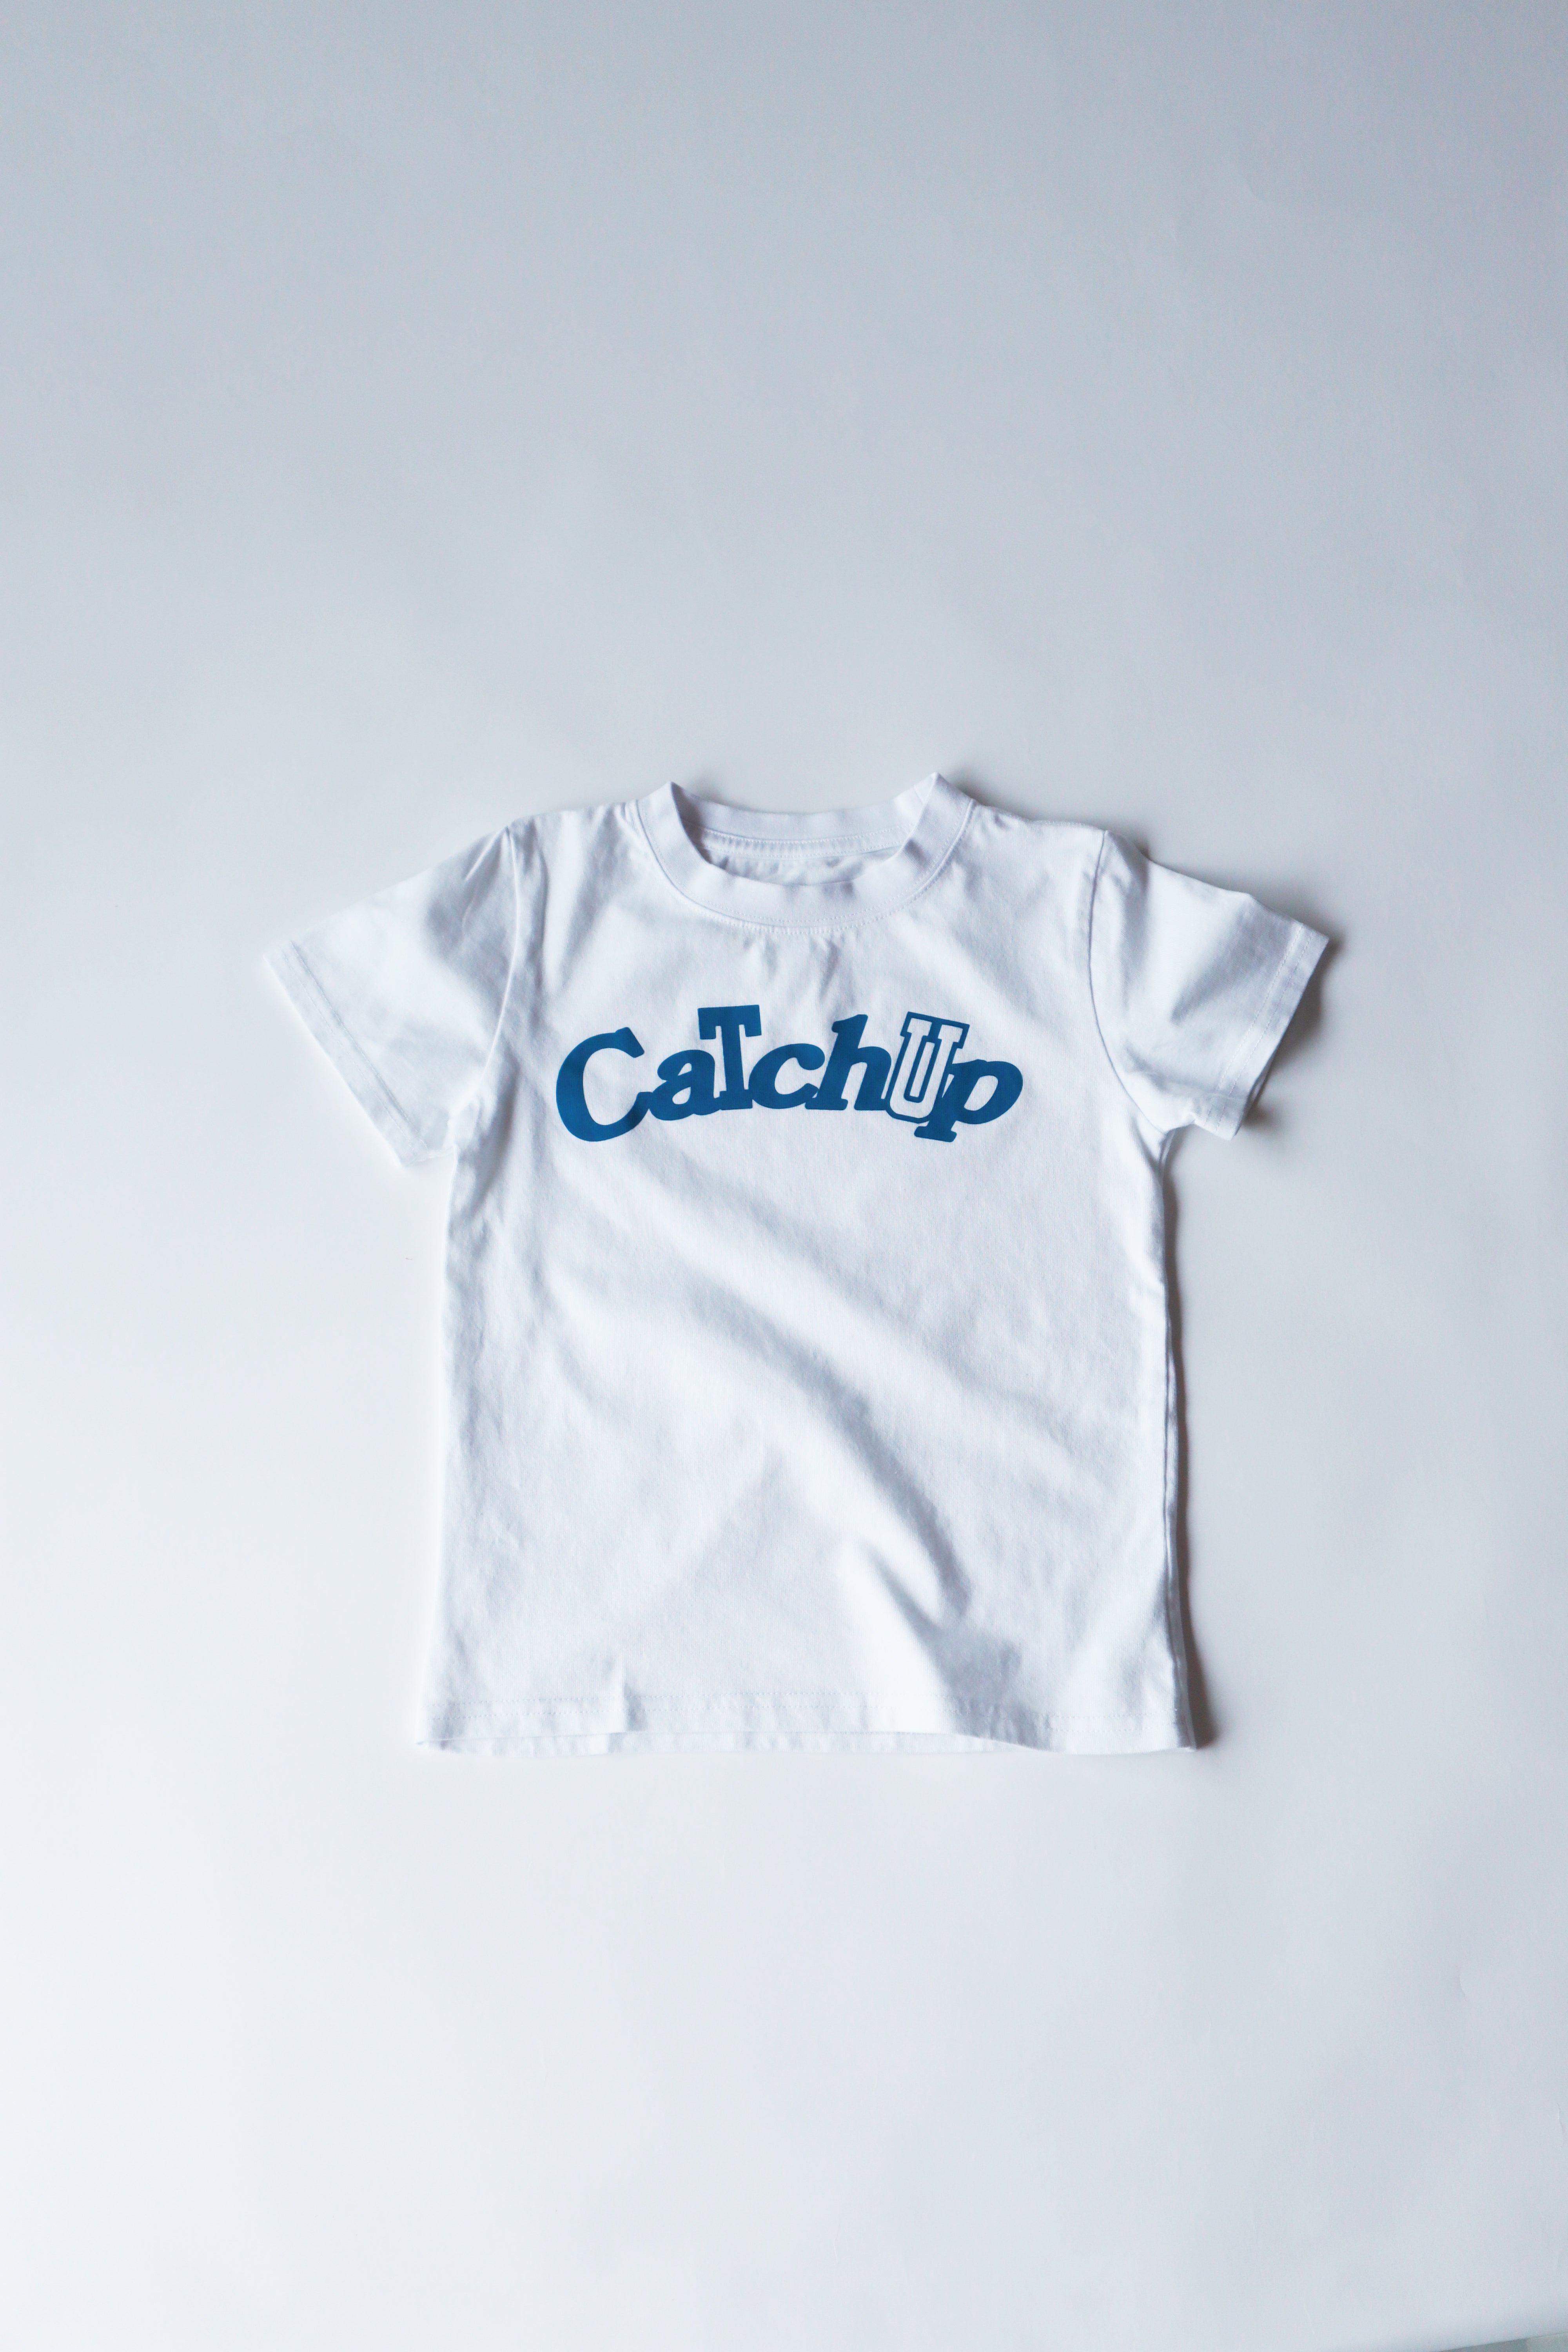 【Catchup】CatchupピグメントTシャツ